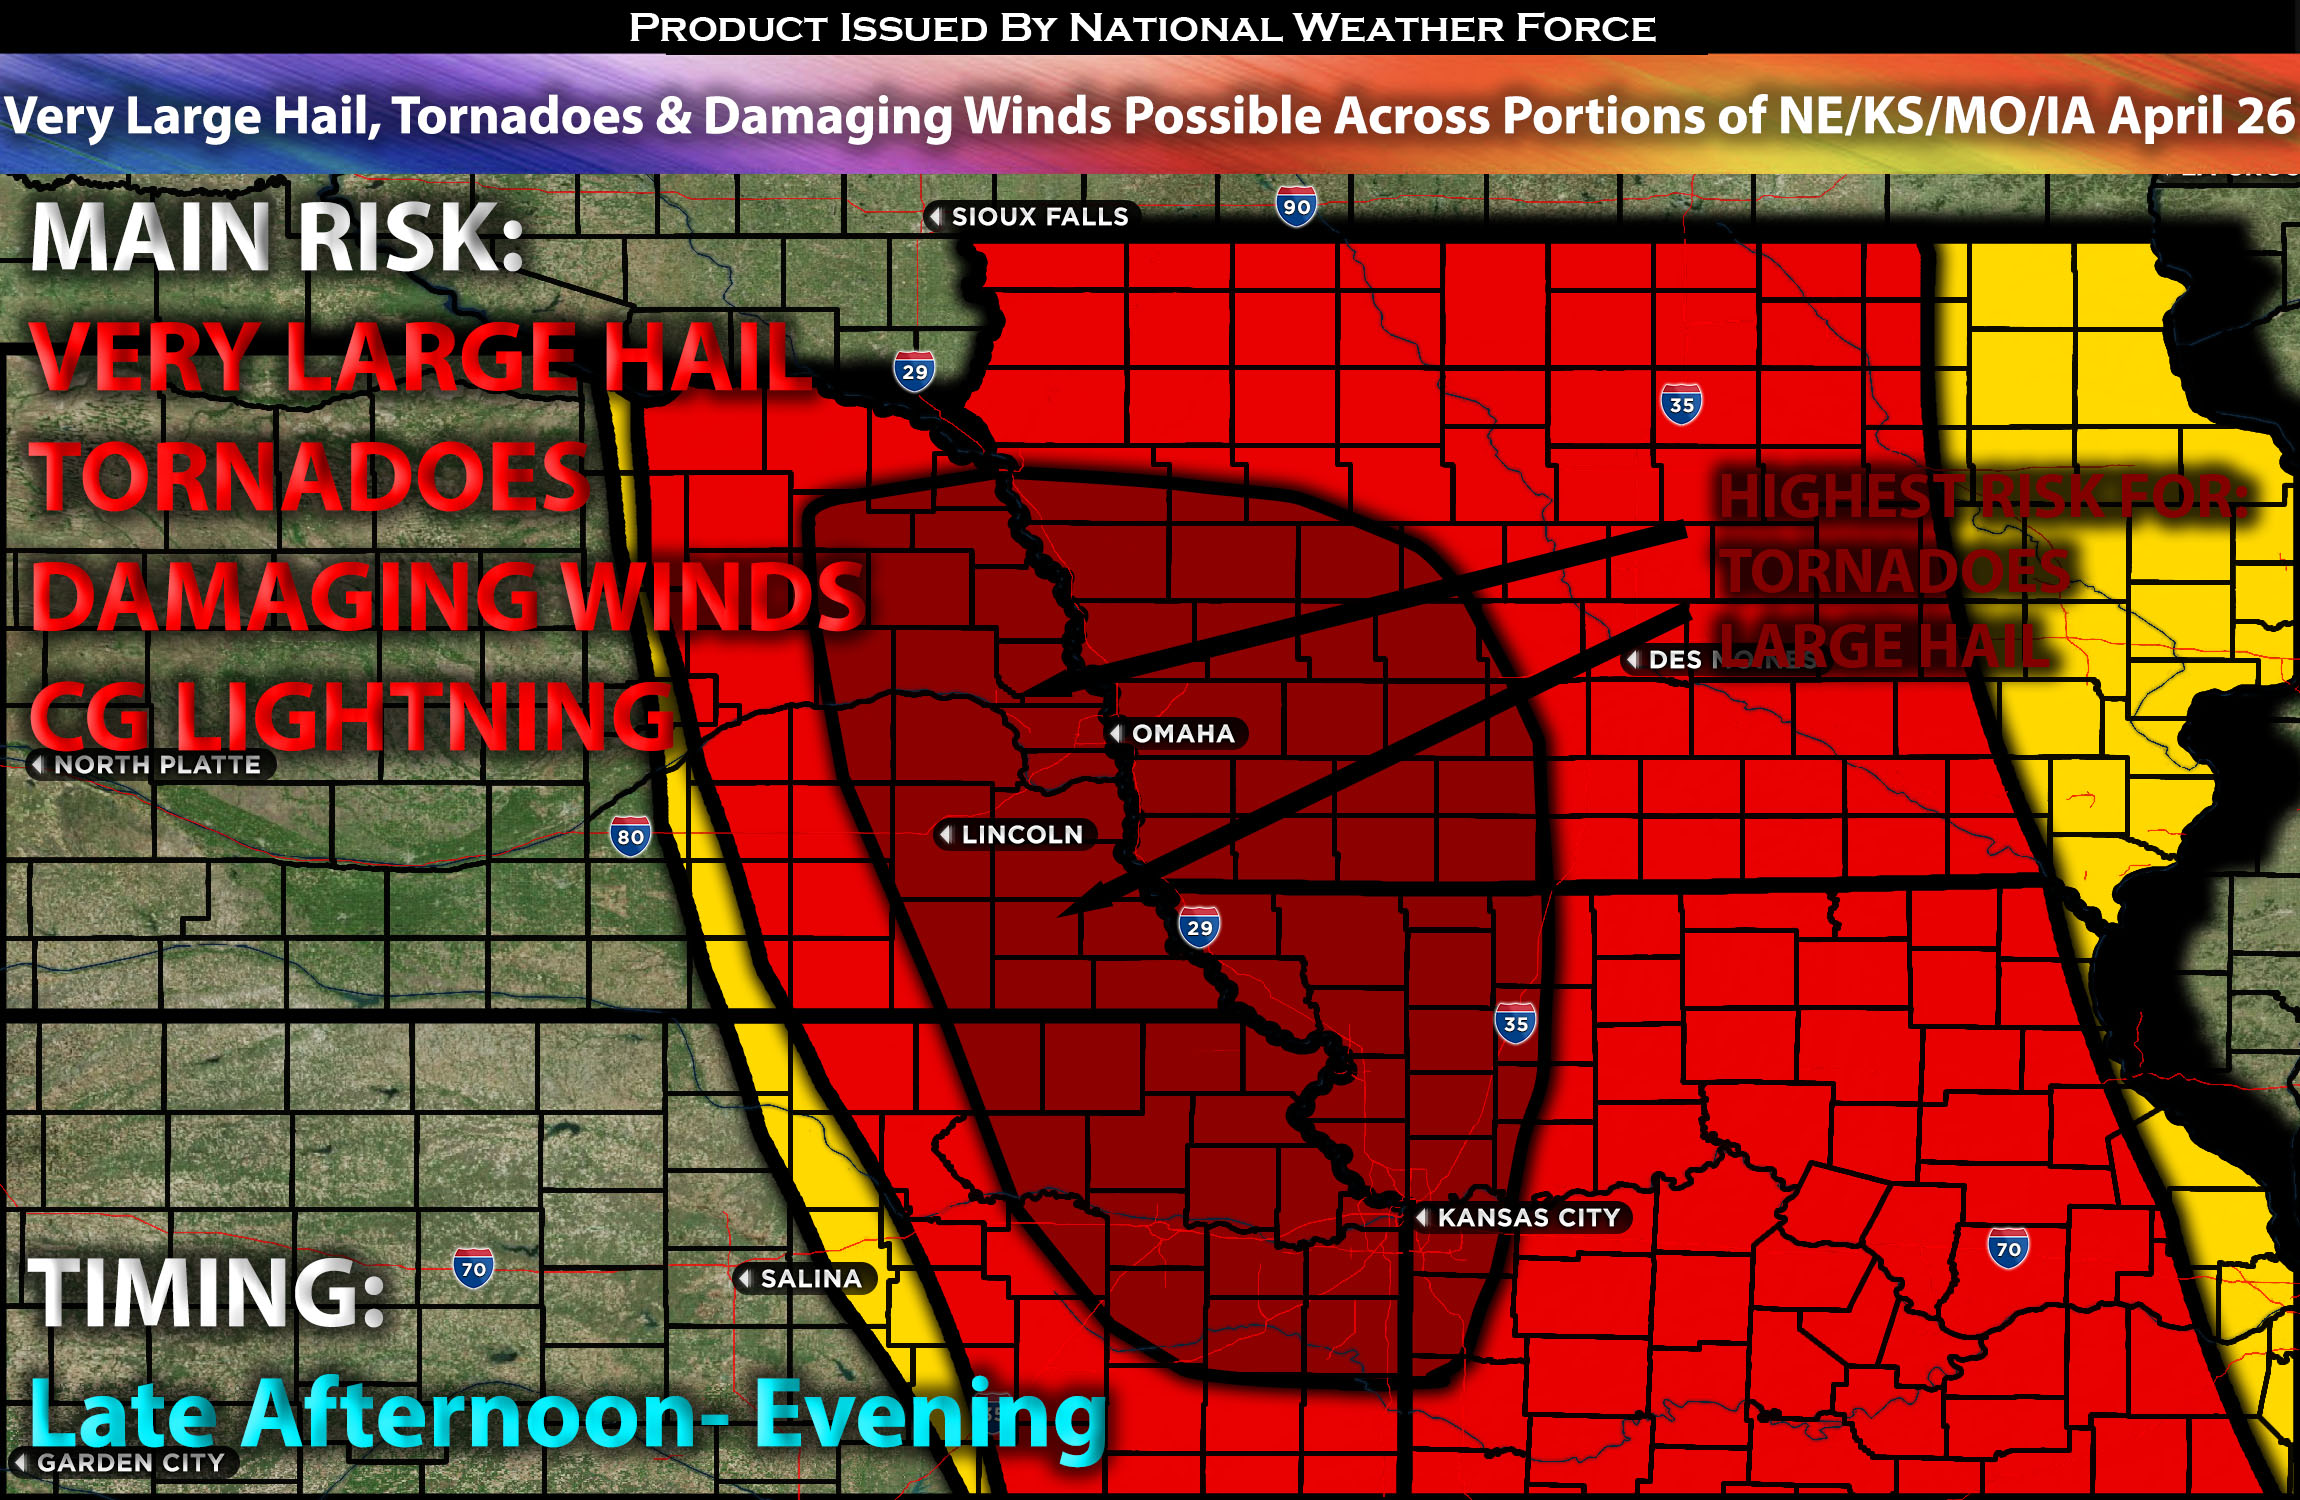 Very Large Hail, Tornadoes & Damaging Winds Possible Across Portions of NE/KS/MO/IA on April 26th